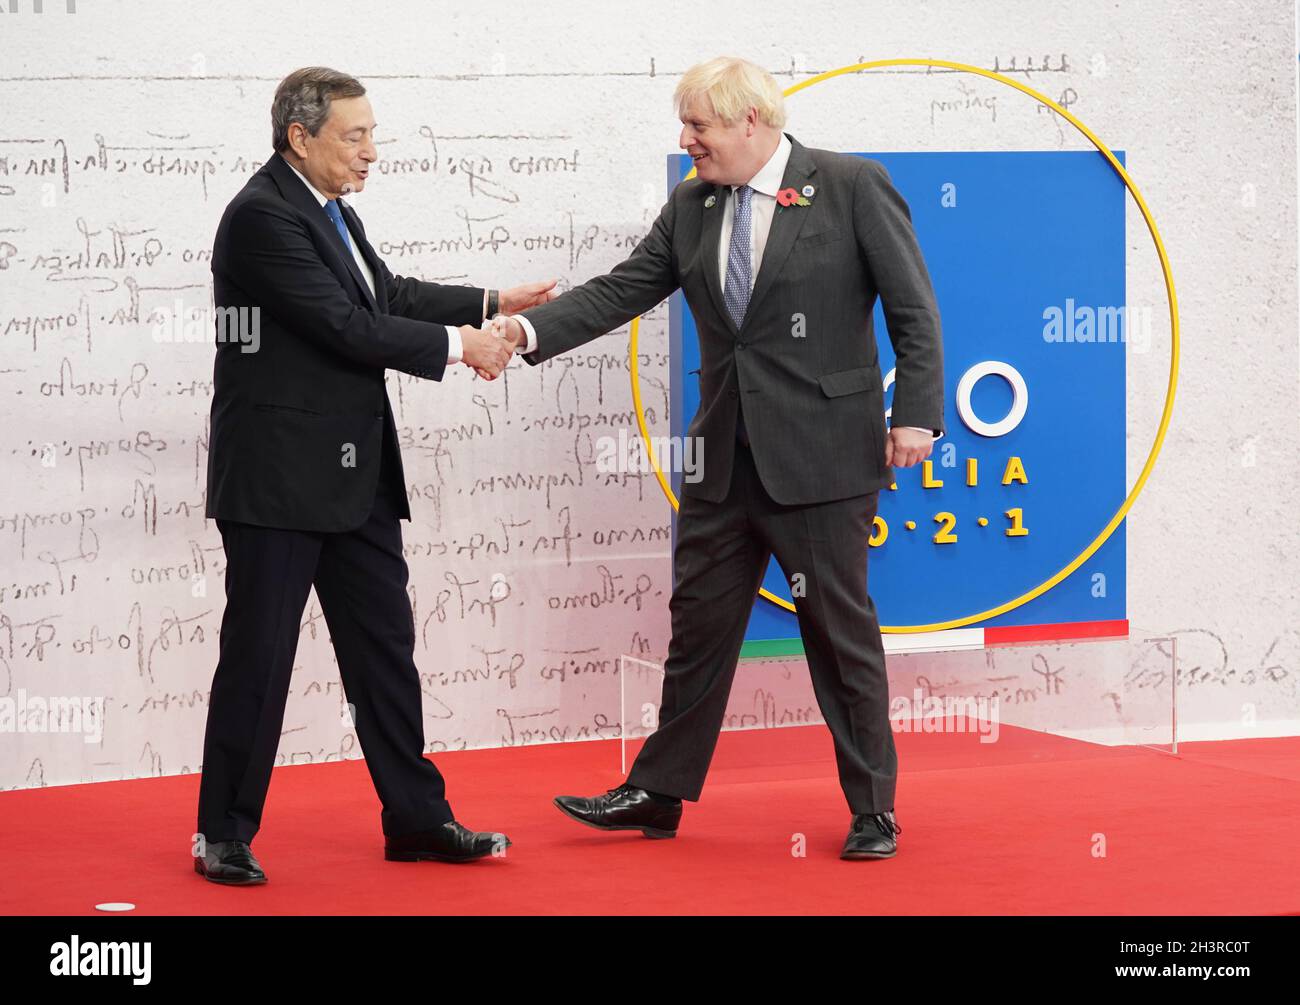 Italian Prime Minister Mario Draghi (left)welcomes Prime Minister Boris Johnson to the G20 summit in Rome, Italy. Picture date: Saturday October 30, 2021. Stock Photo